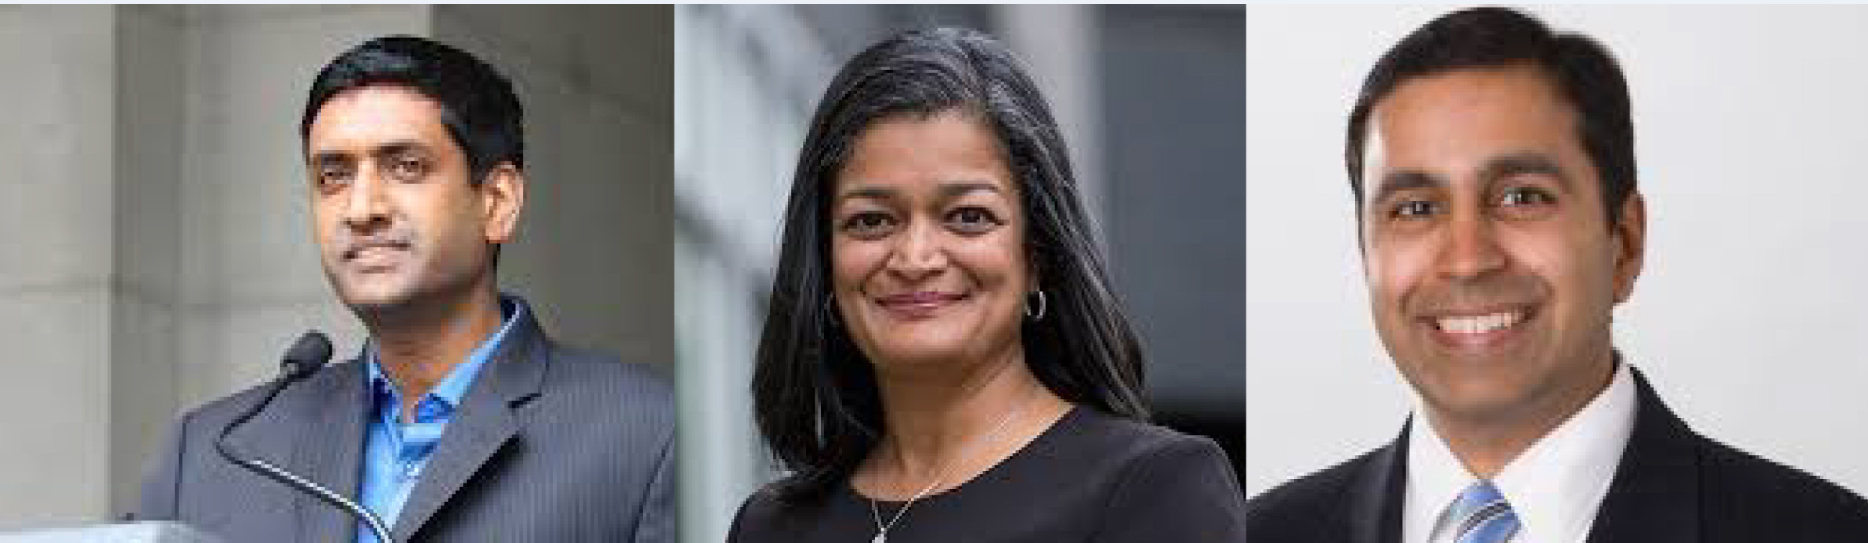 History in the making for Indian-American Congressional candidates